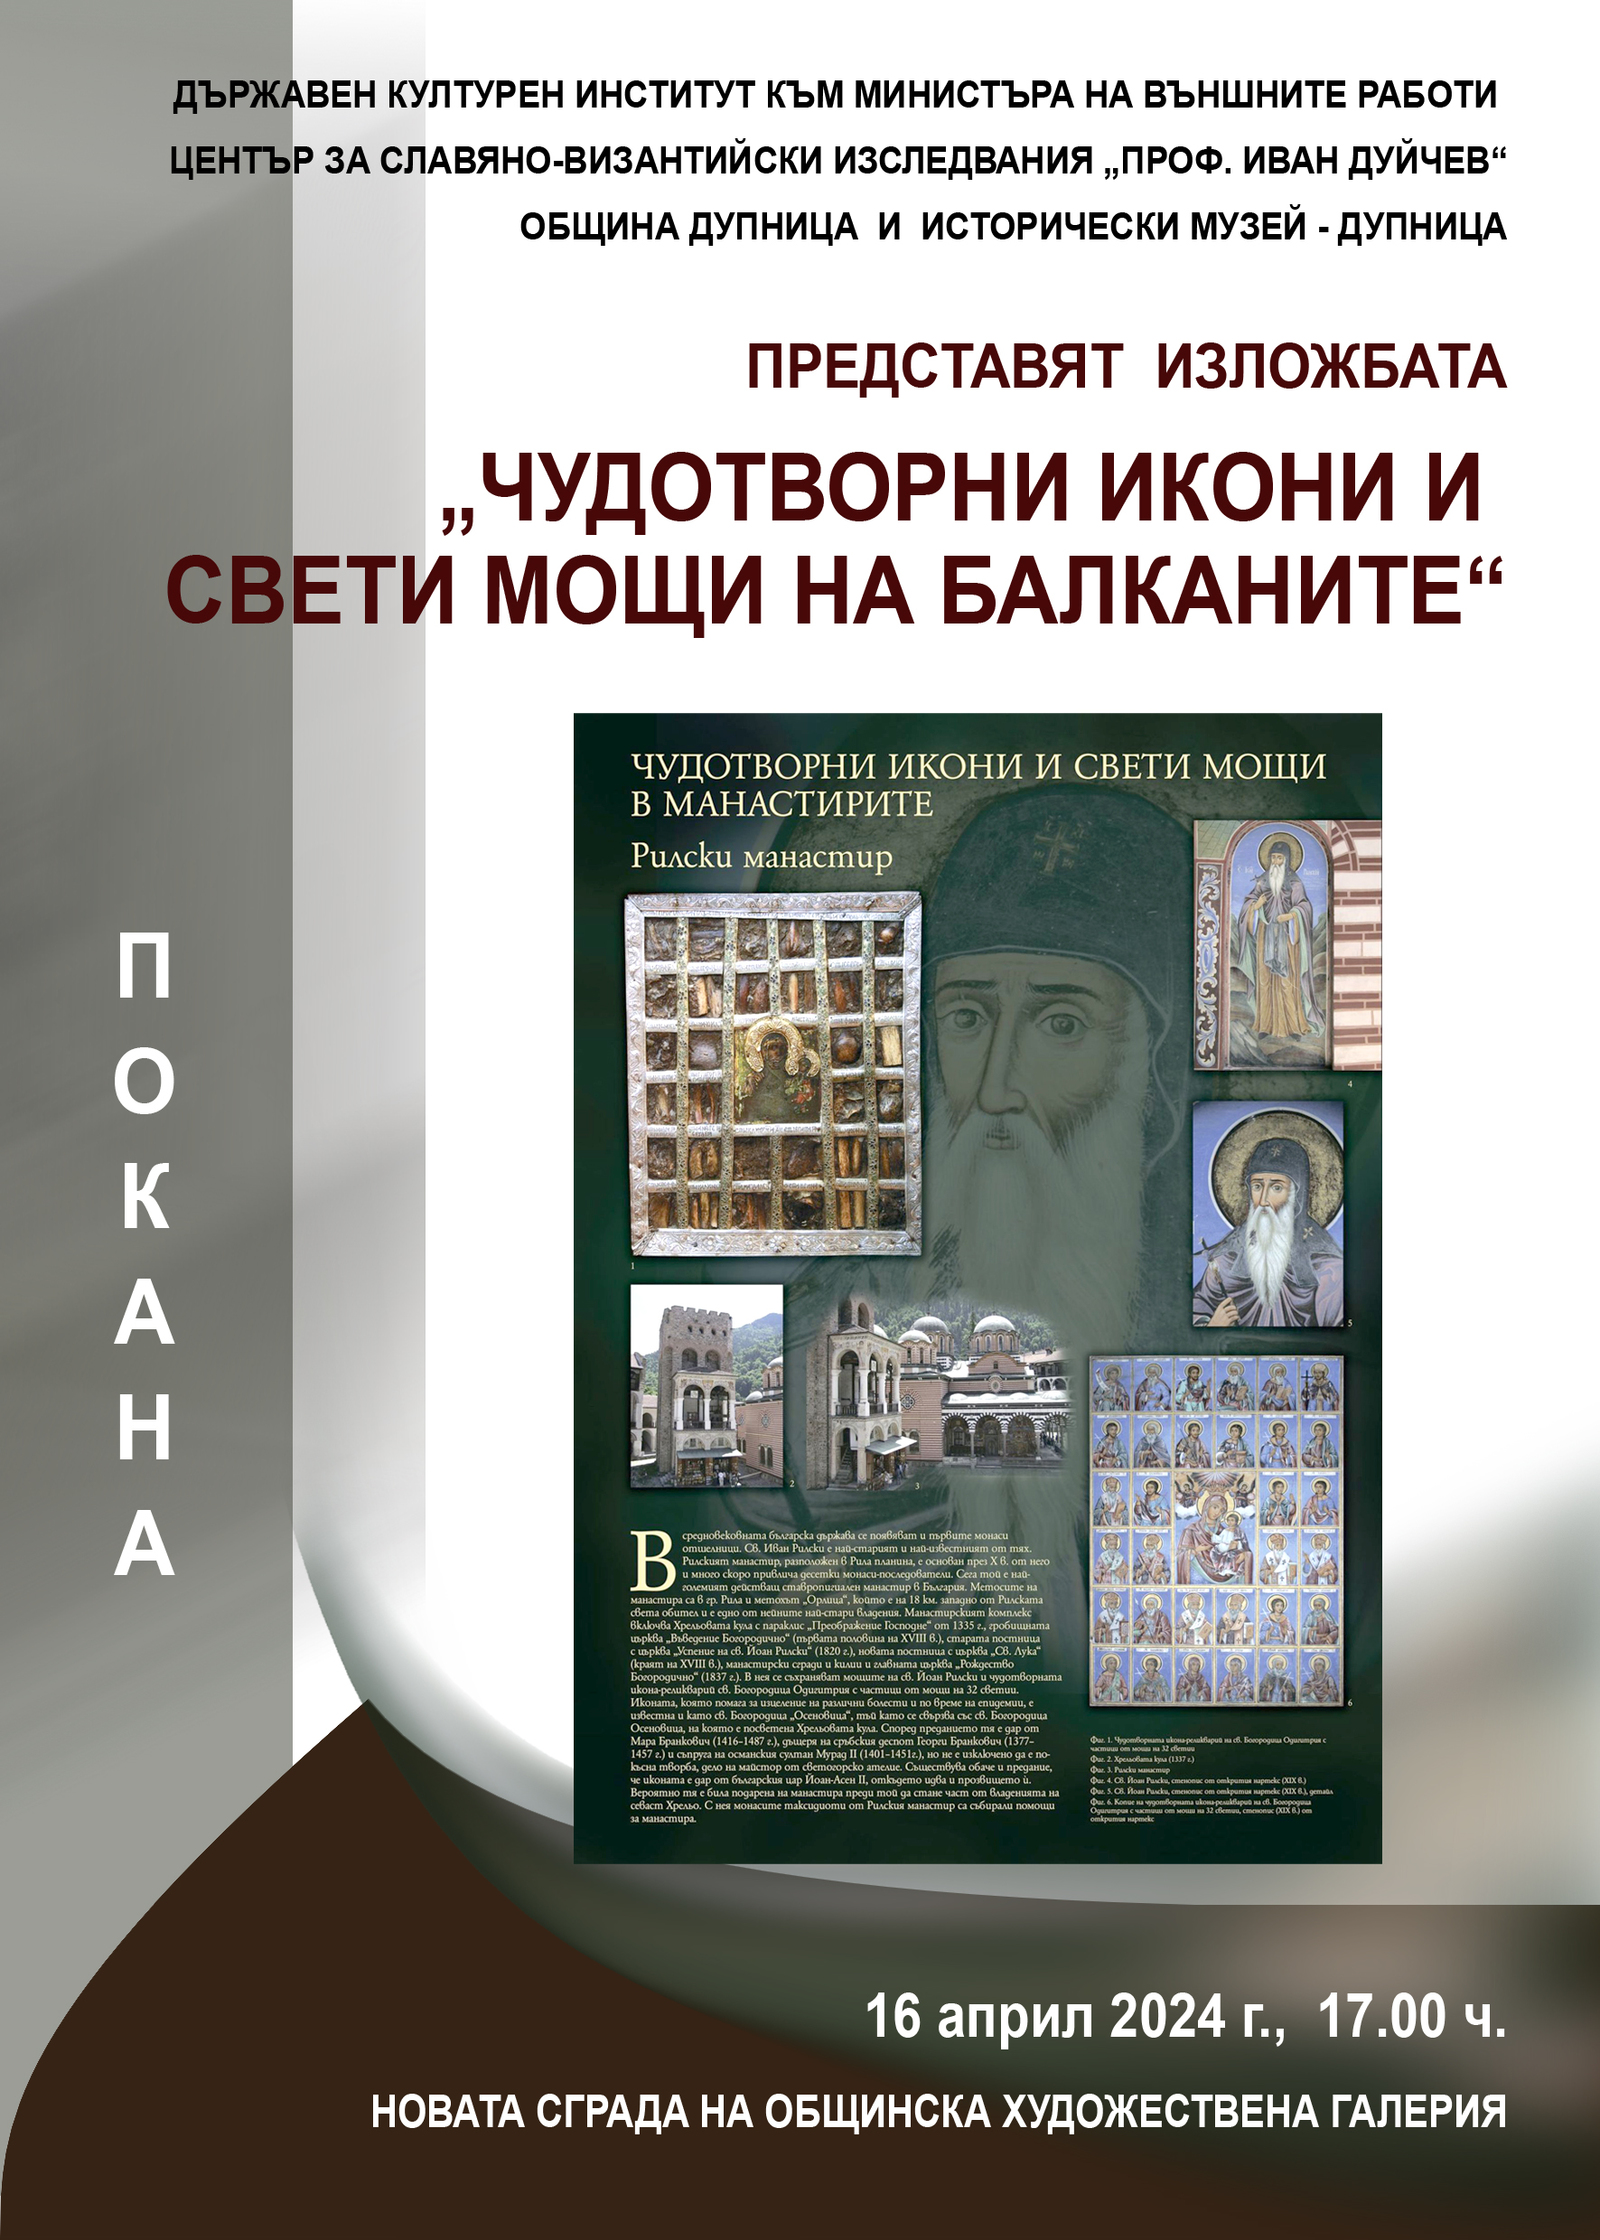 The Exhibition "Miraculous Icons and Holy Relics of the Balkans" will be Presented in Dupnitsa